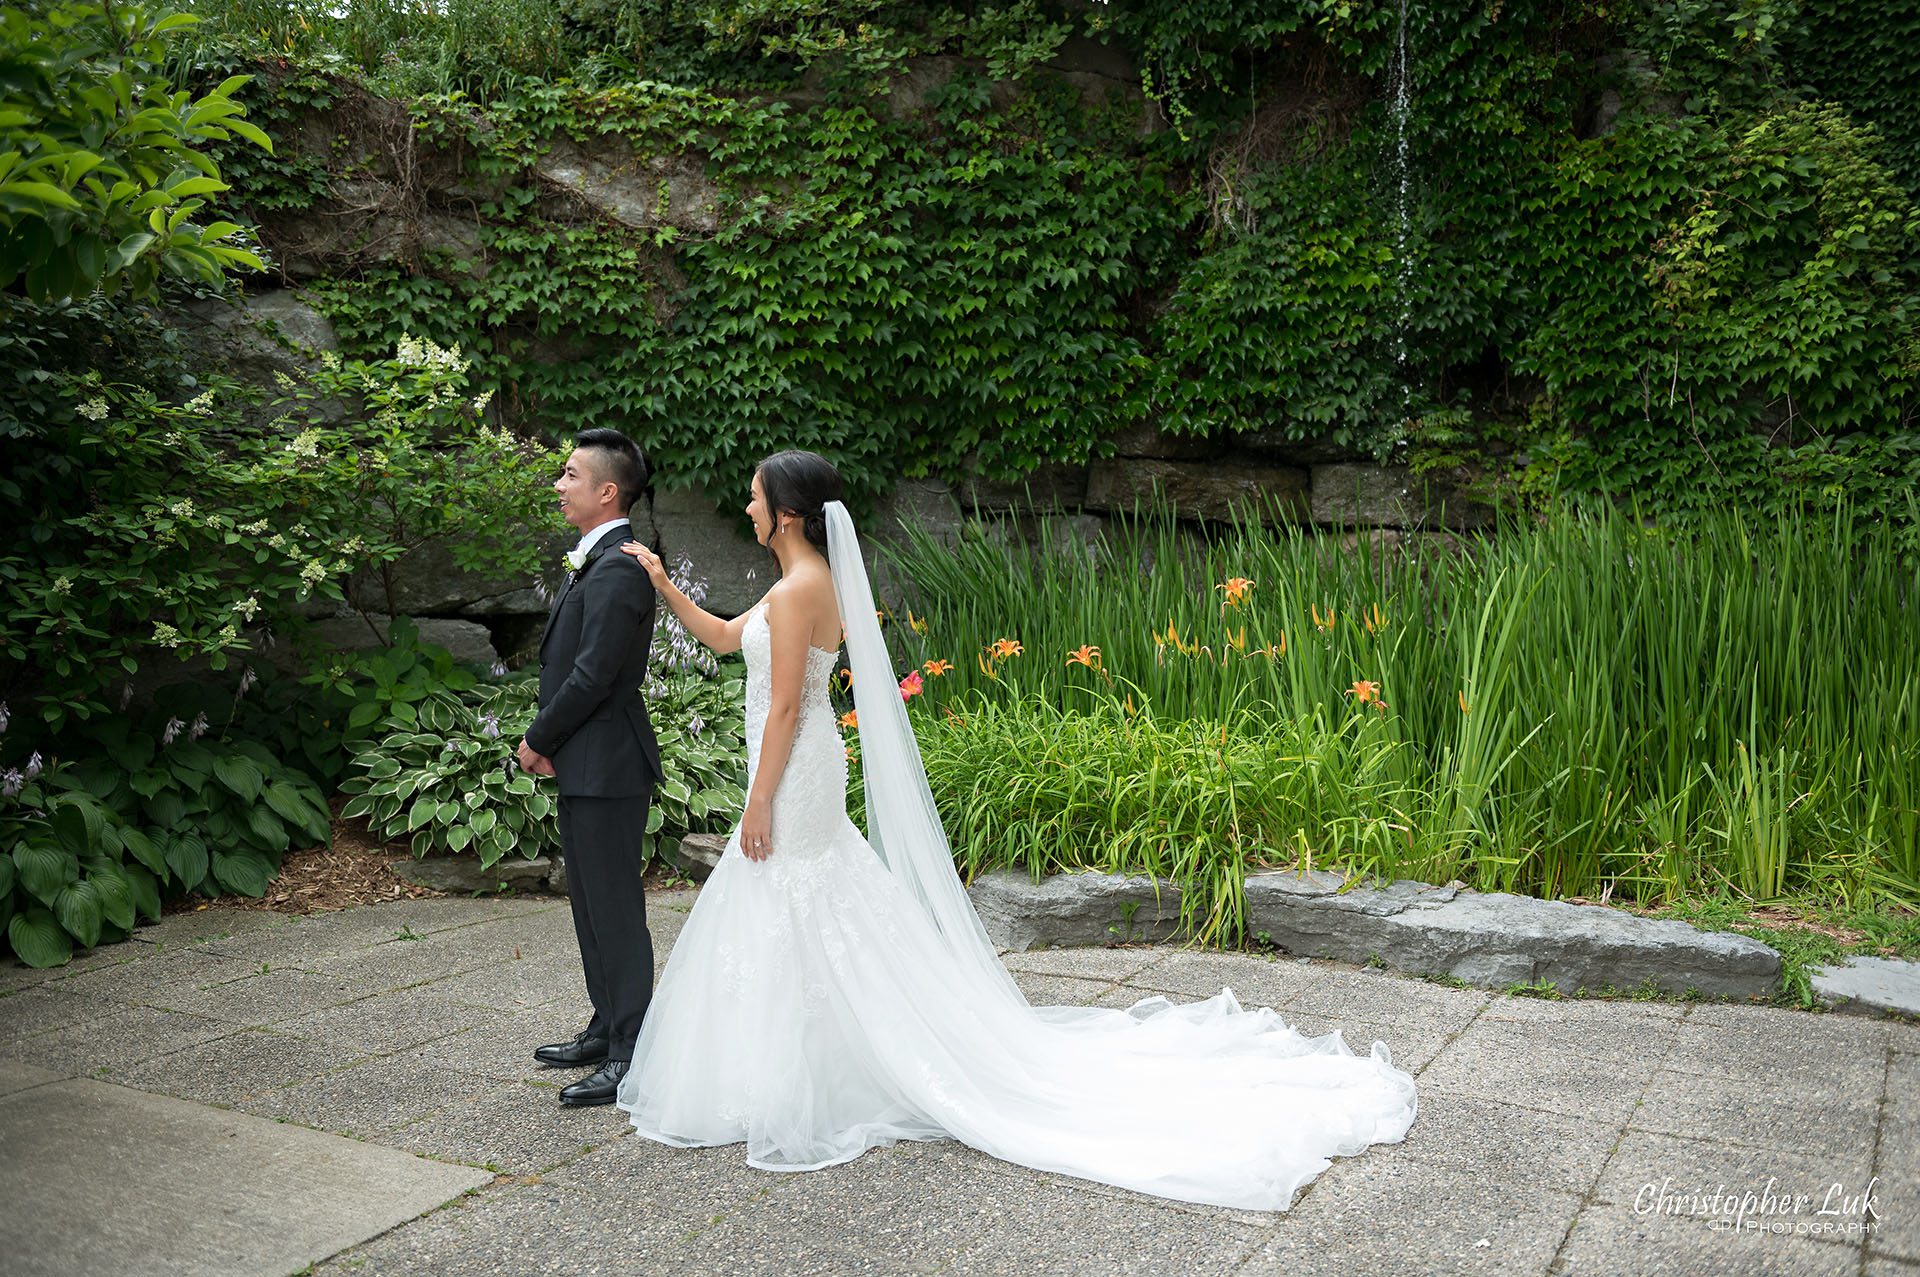 Toronto Wedding Photography Candid Natural Photojournalistic Organic First Look Reveal Bride Groom 